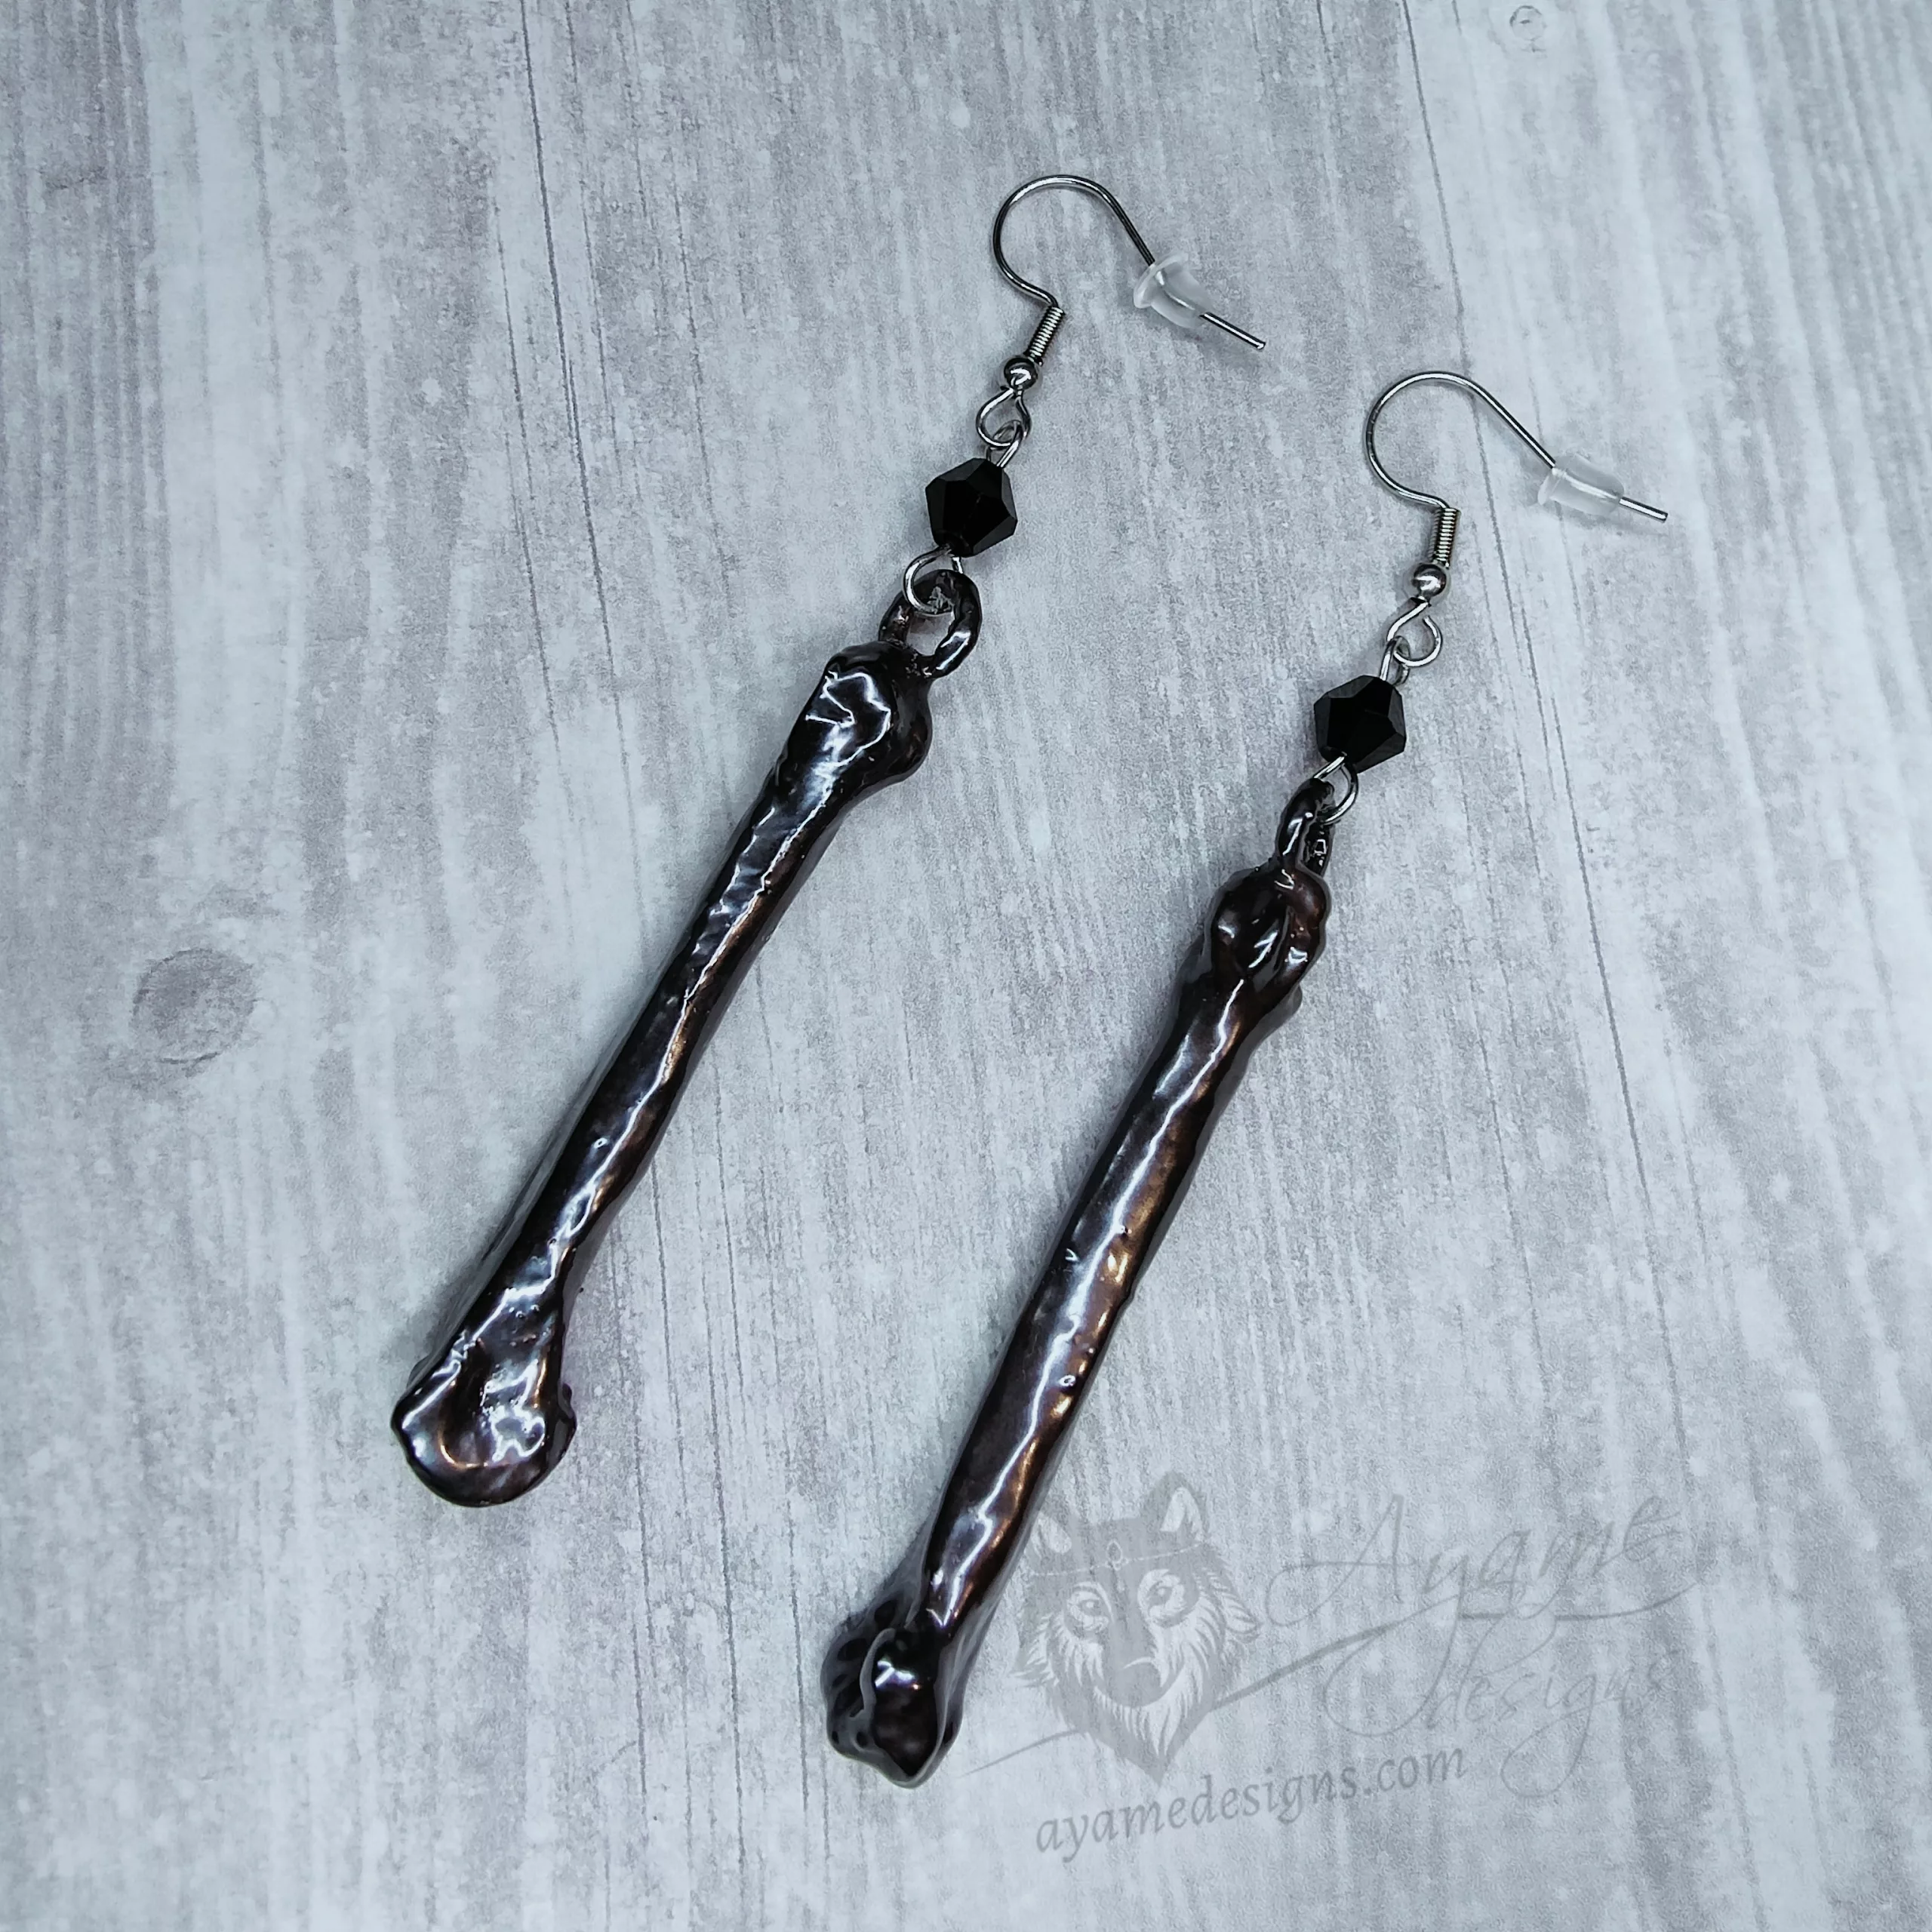 Handmade earrings made with real dog bones that have been electroformed (plated) with copper and given a gunmetal finish, with black Austrian crystal beads and stainless steel earring hooks